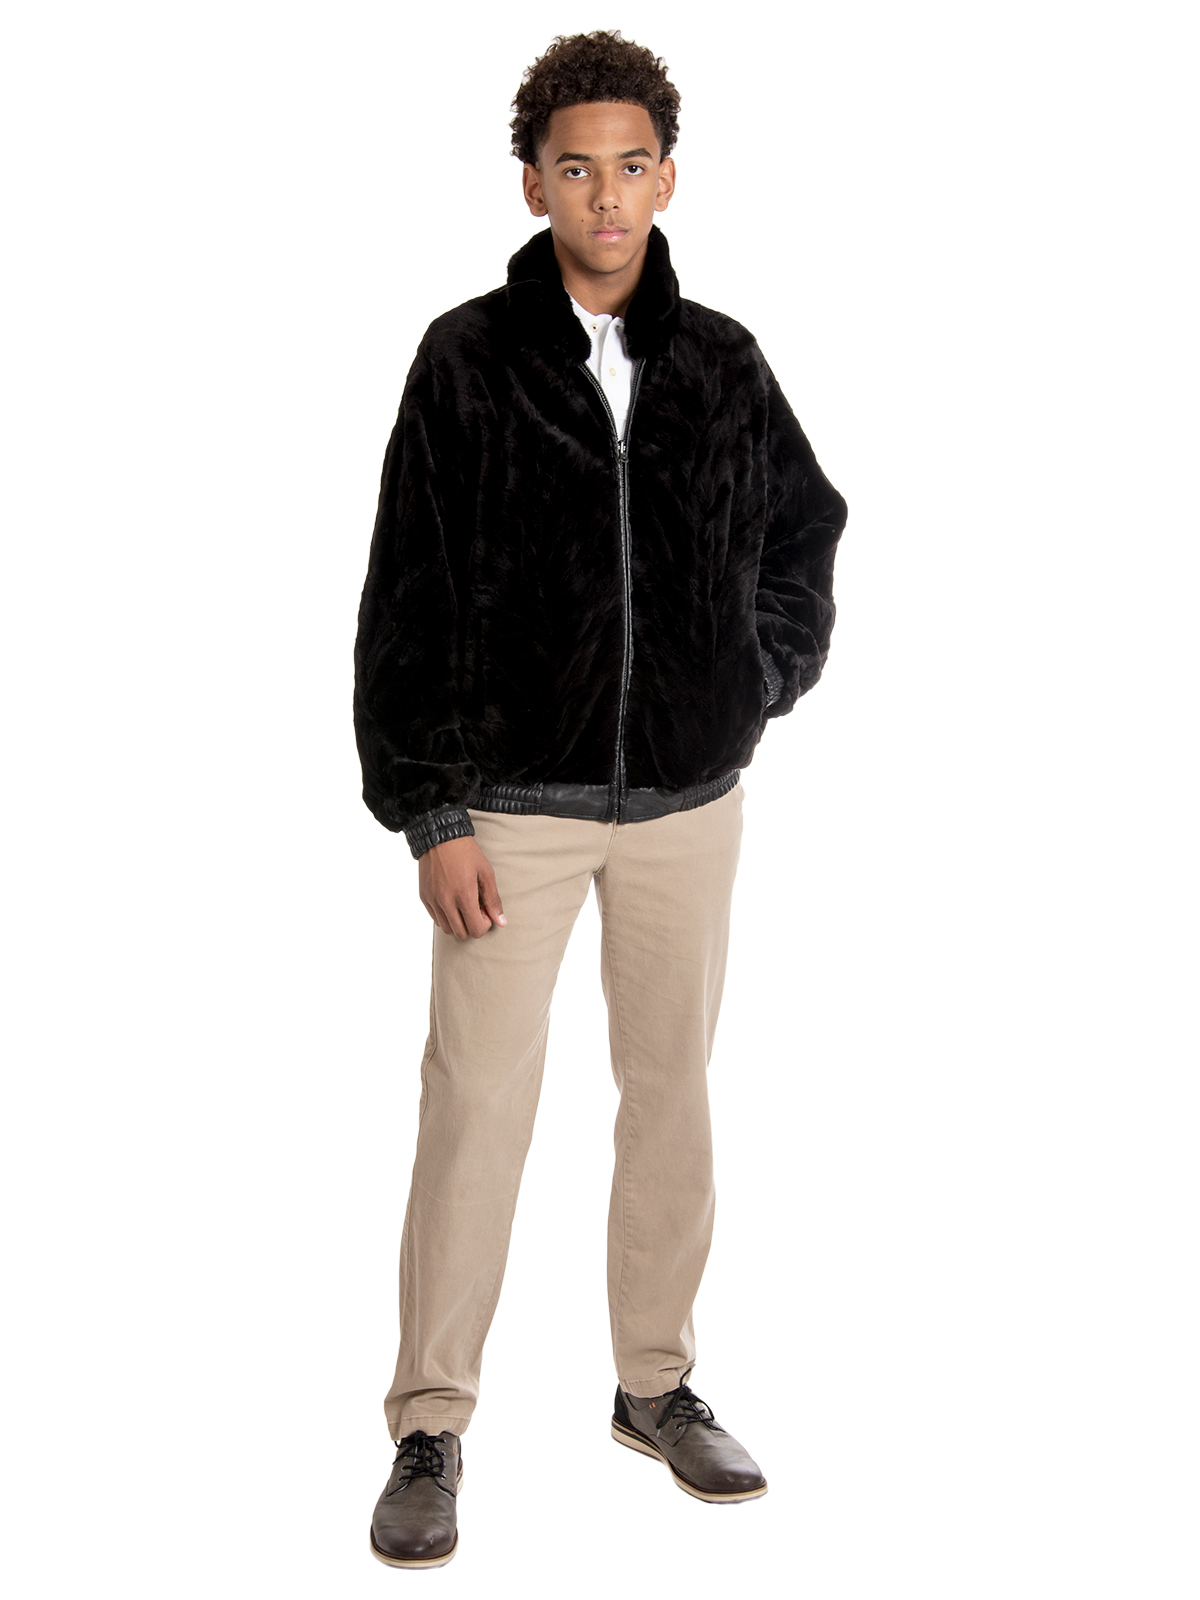 Man's Black Sheared and Sculptured Mink Fur Jacket Reversing to Leather